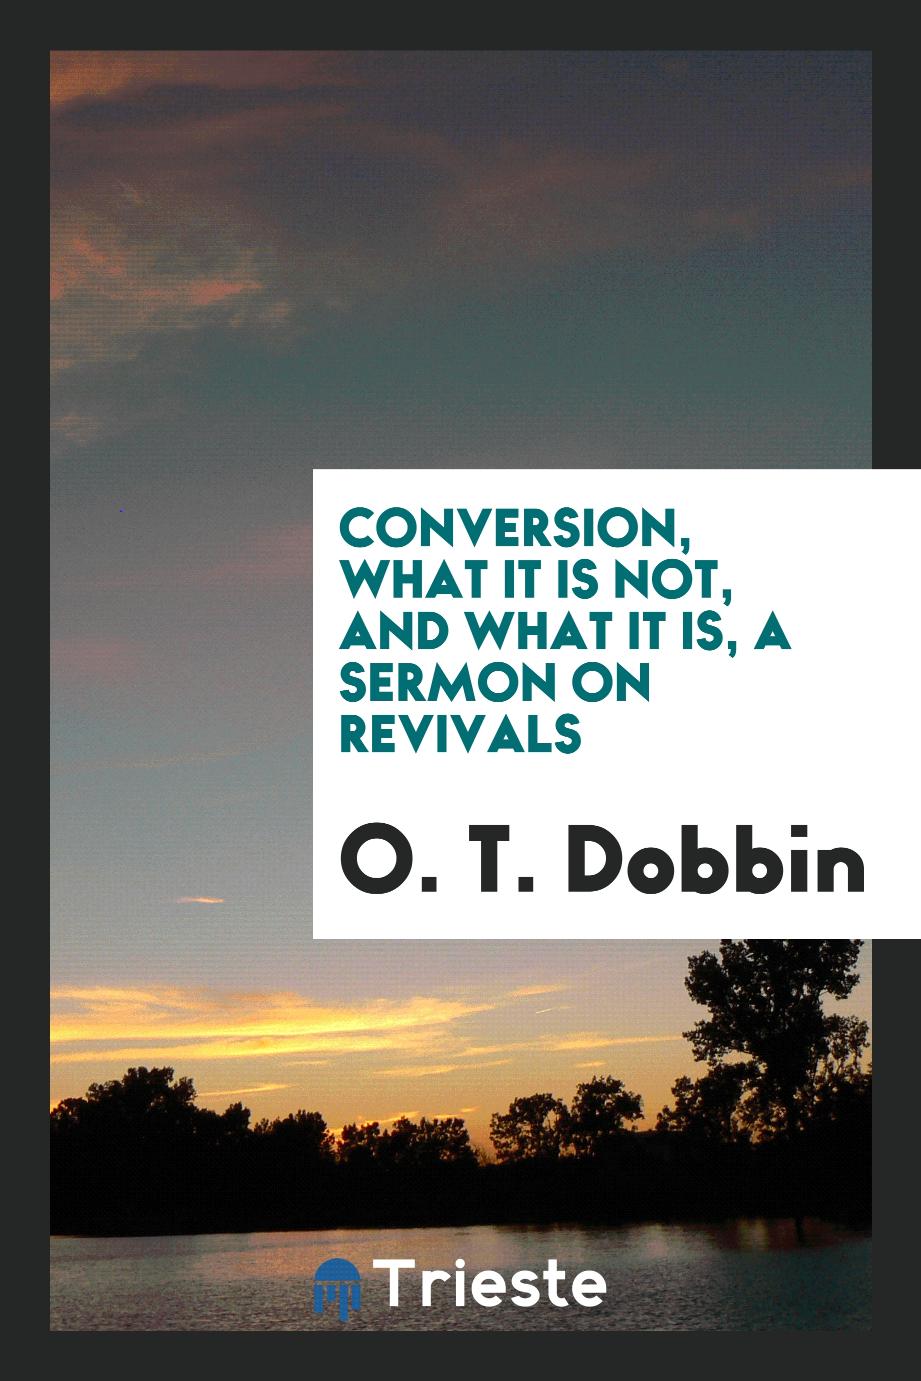 Conversion, what it is not, and what it is, a sermon on revivals